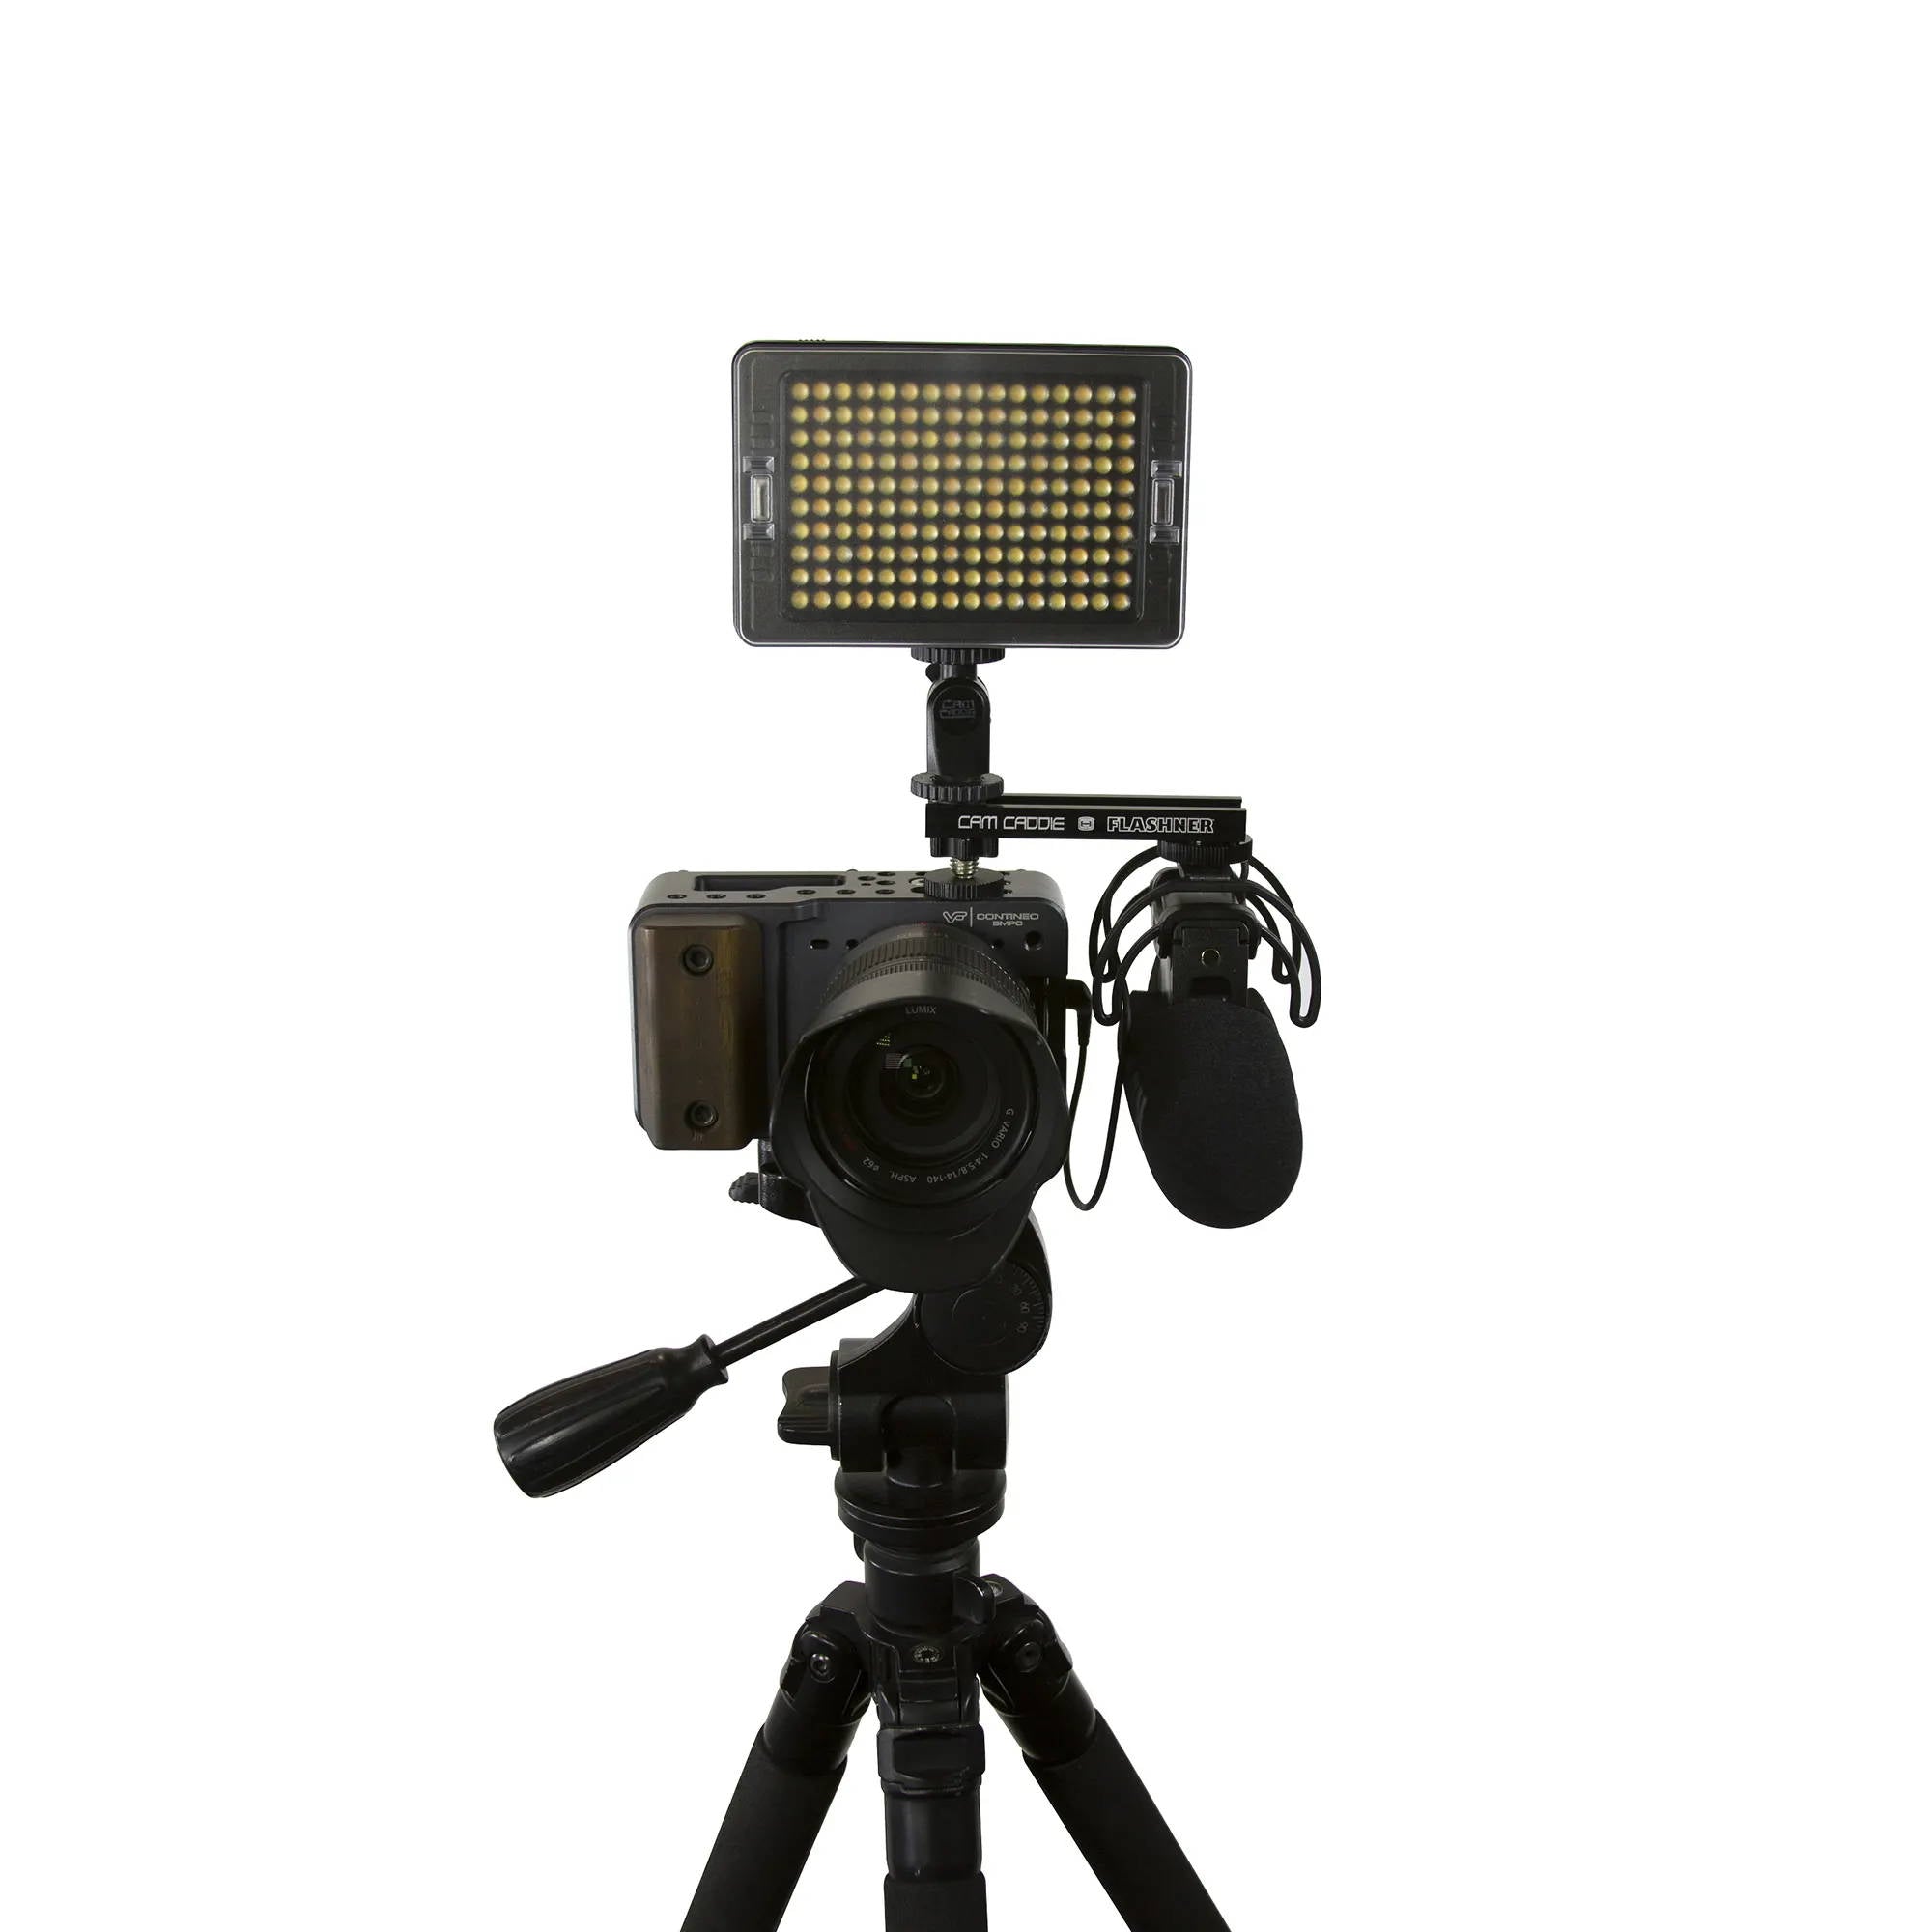 COLD SHOE MOUNT FLASH ADAPTER TO 1/4